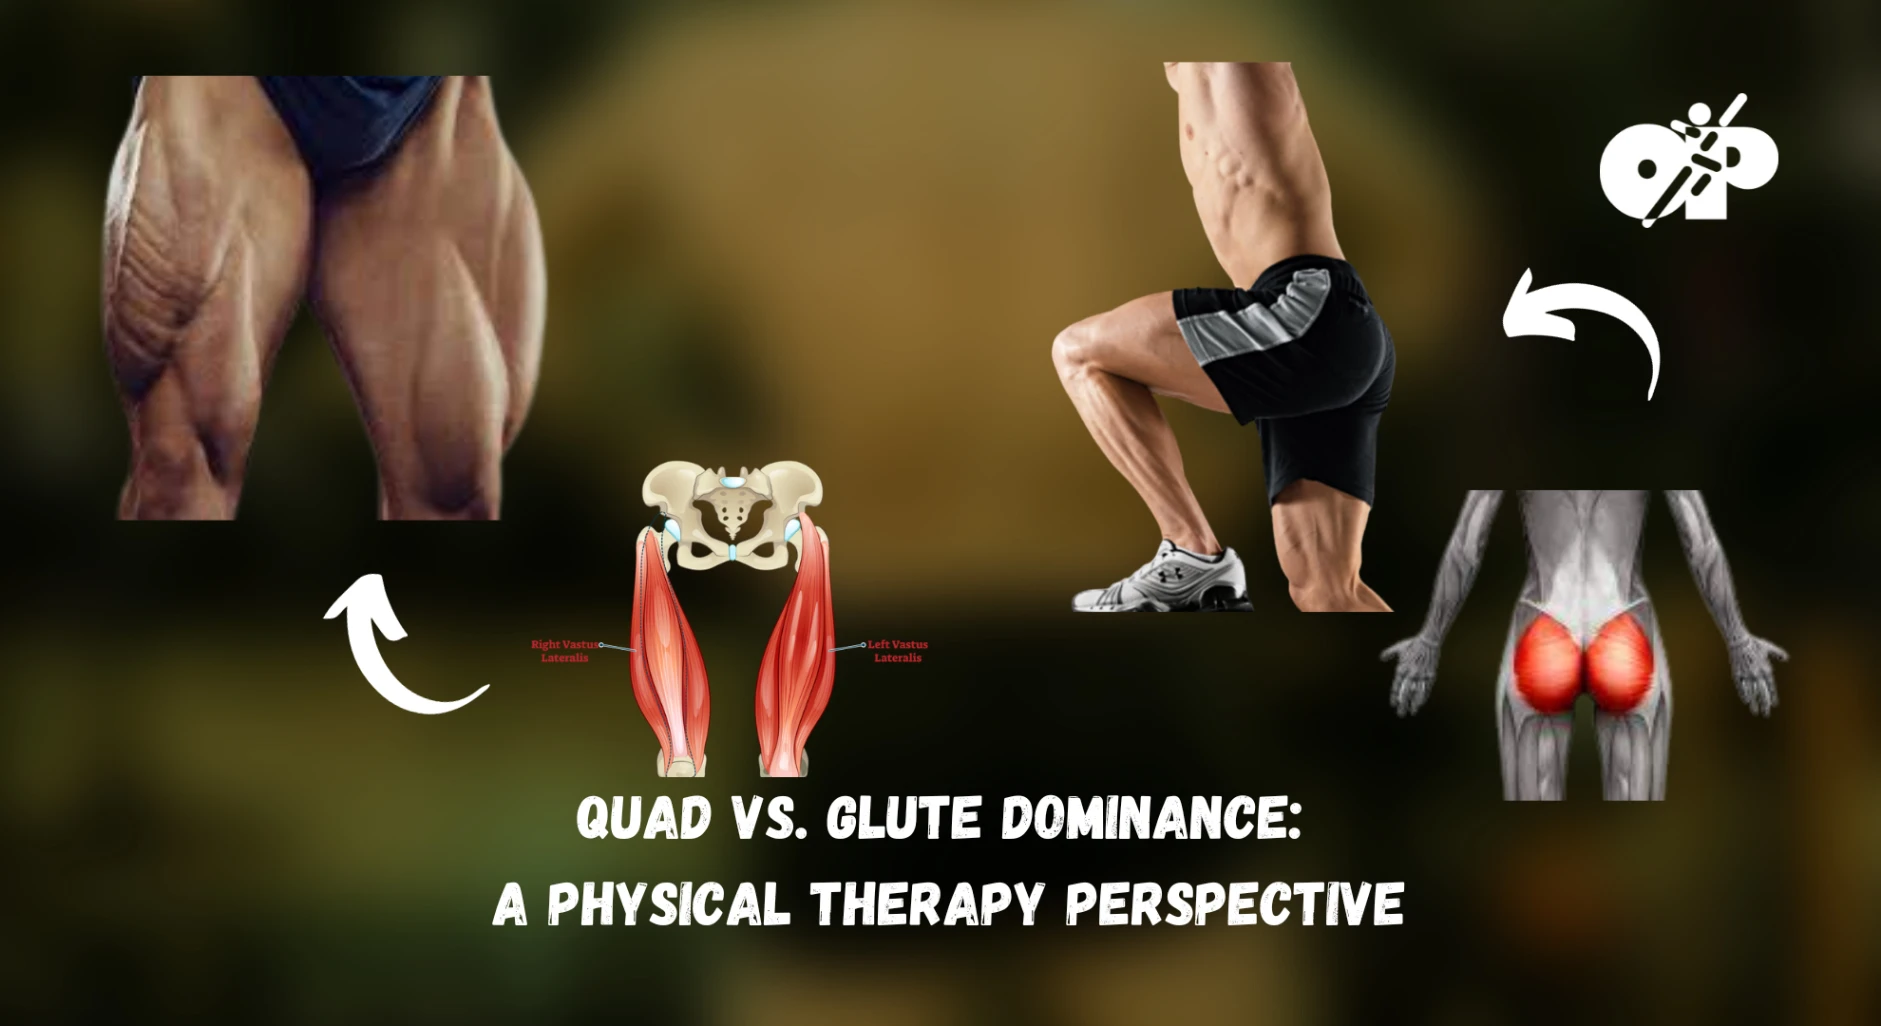 34. Quad vs. Glute Dominance – A Physical Therapy Perspective